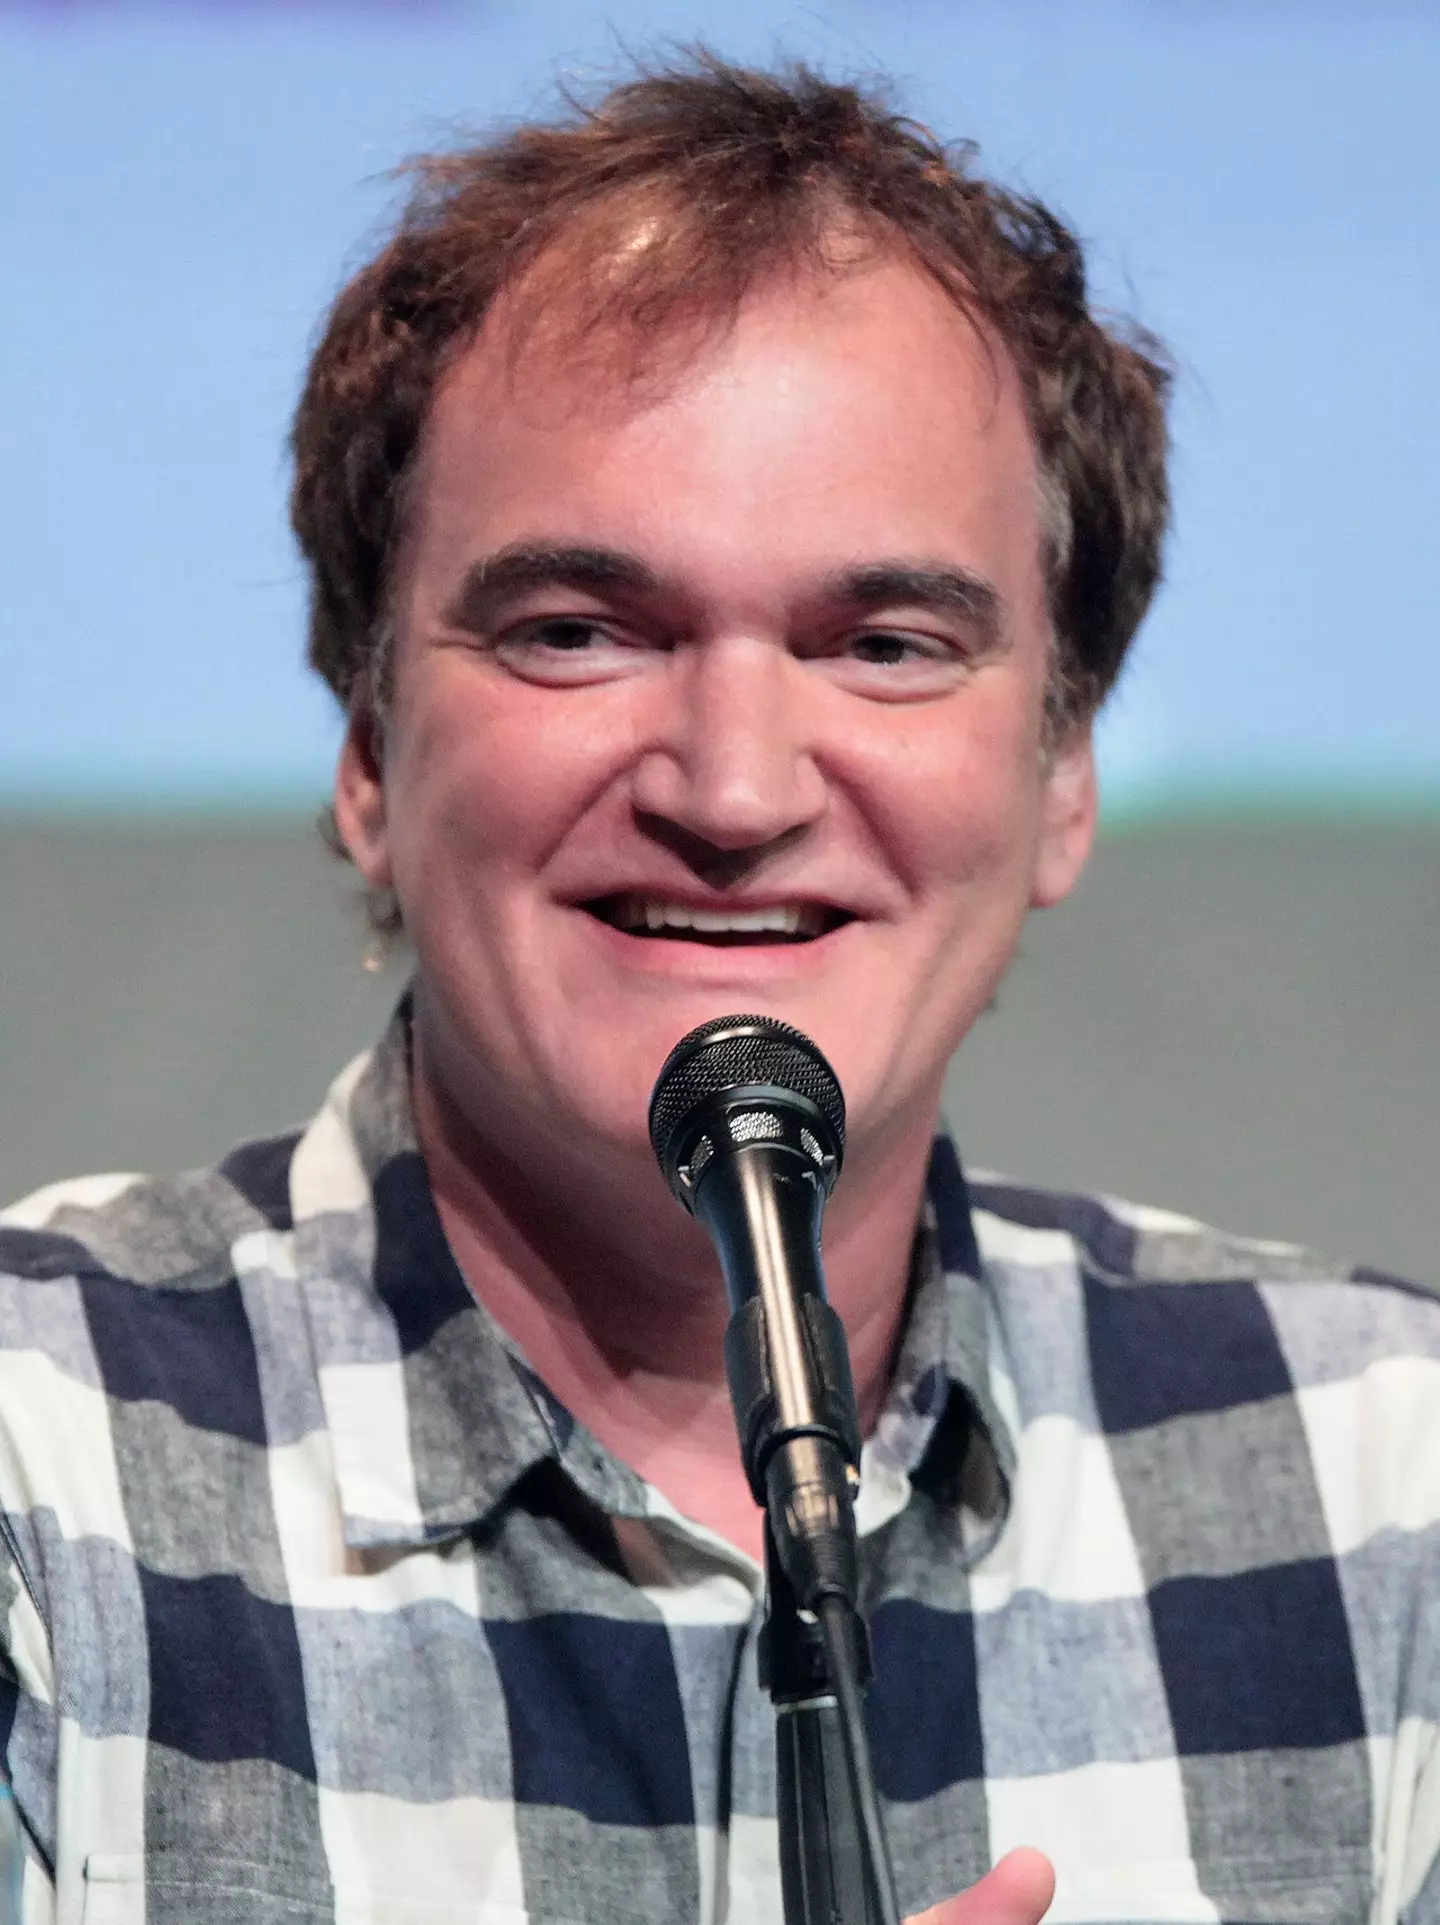 Quentin Tarantino is aware that you think he has a foot fetish. Critic.